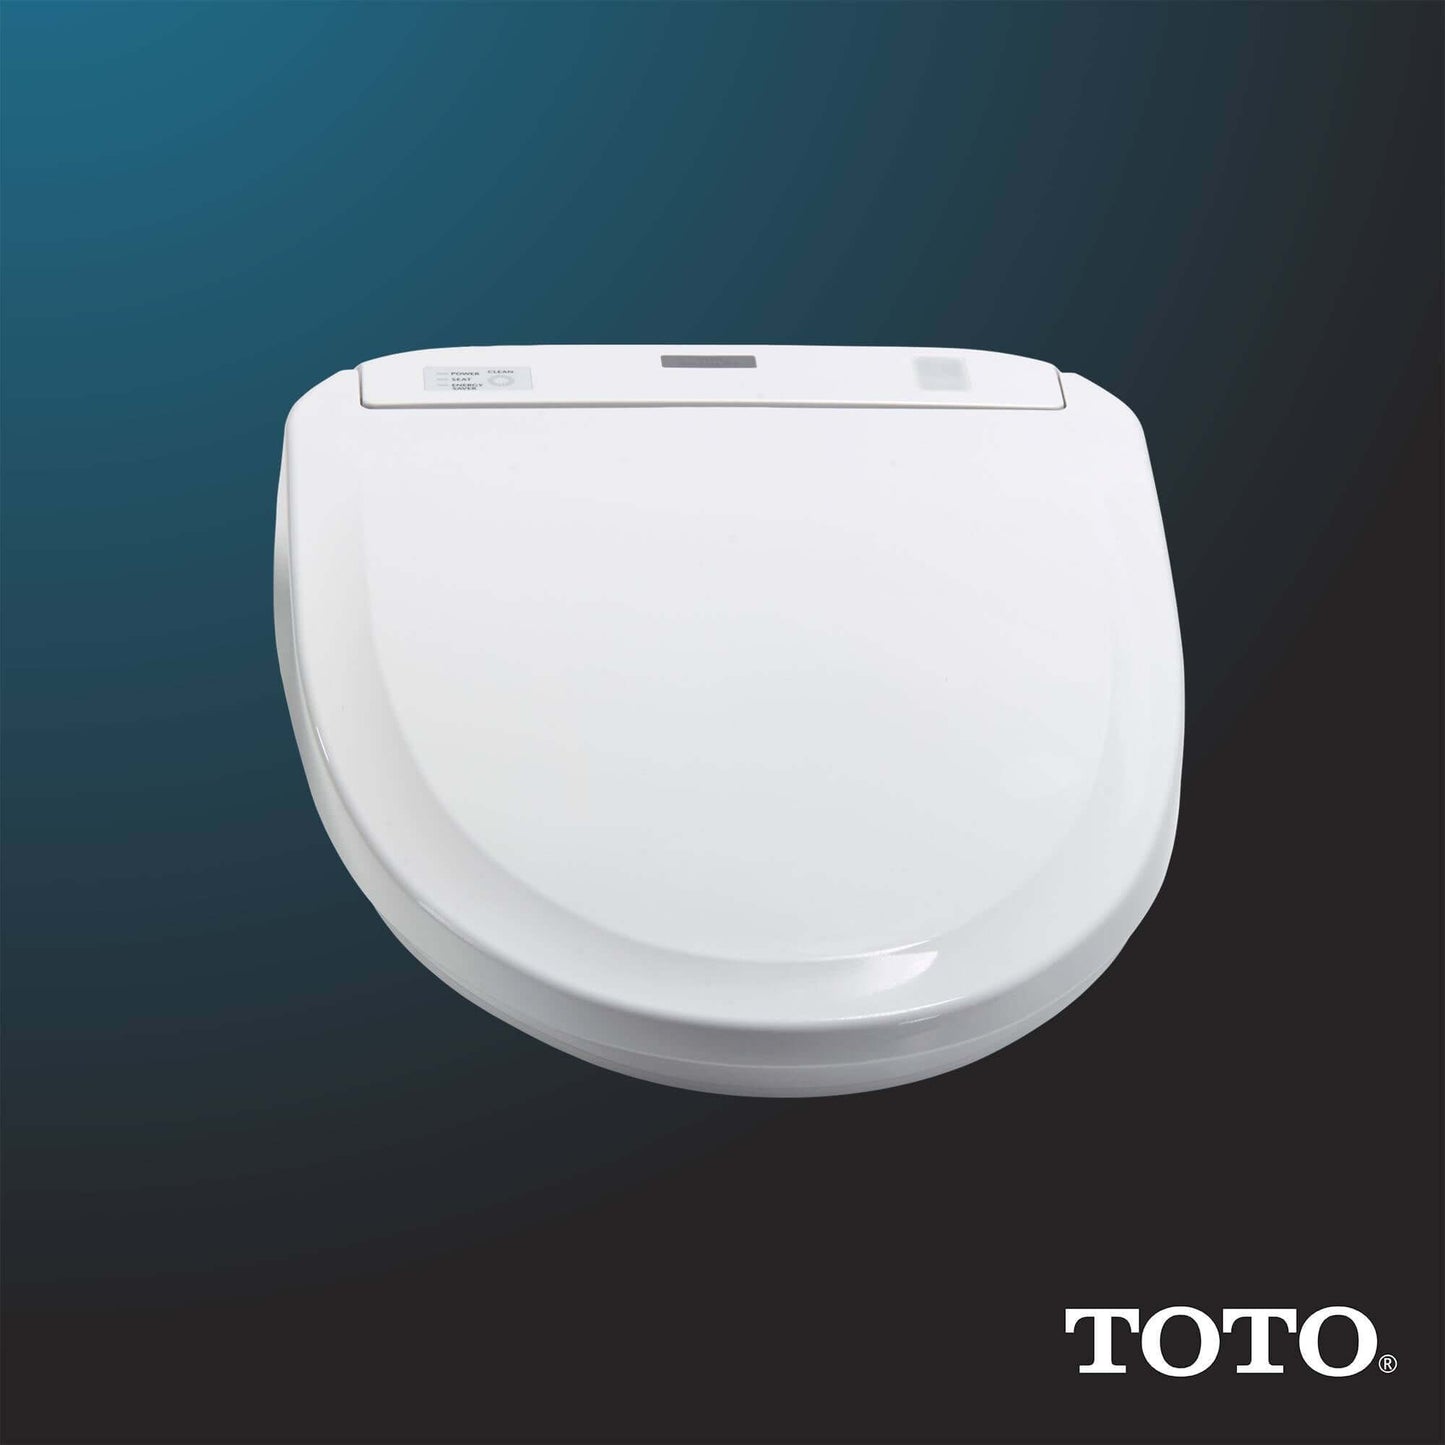 TOTO WASHLET S300e Electronic Bidet Toilet Seat with EWATER+ Cleansing, Round - SW573#01